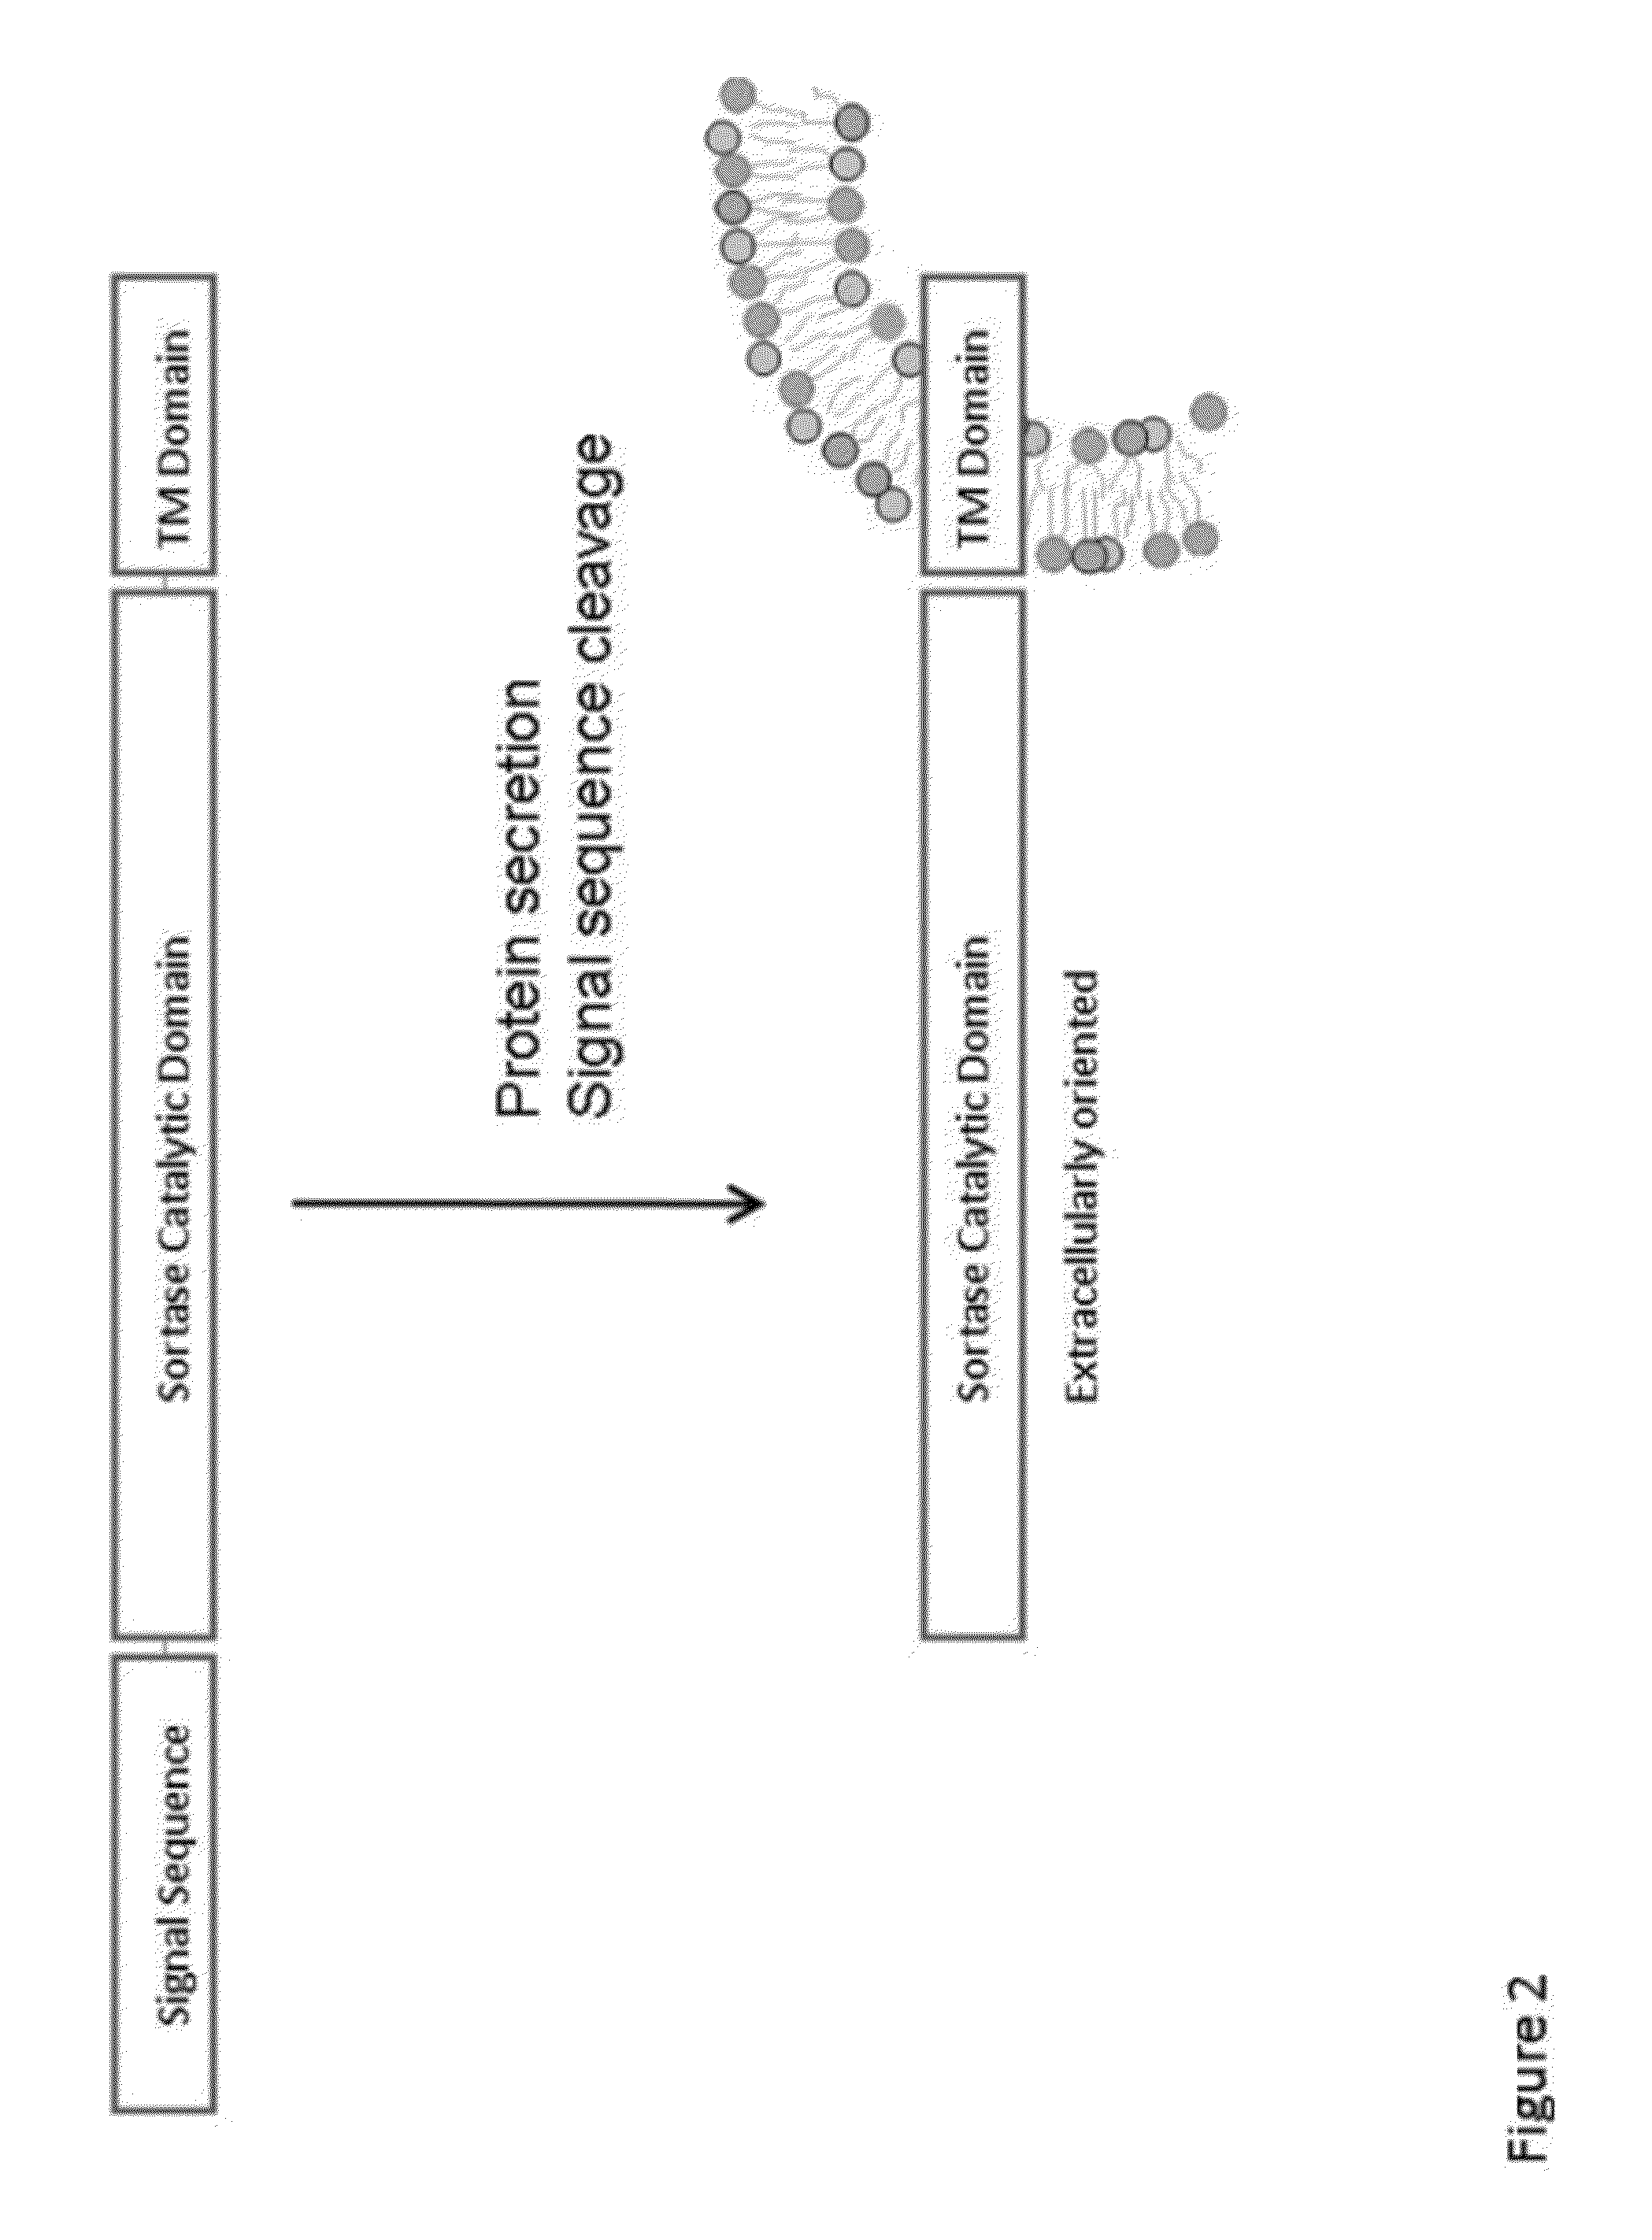 Compositions and methods for enhancing production of a biological product